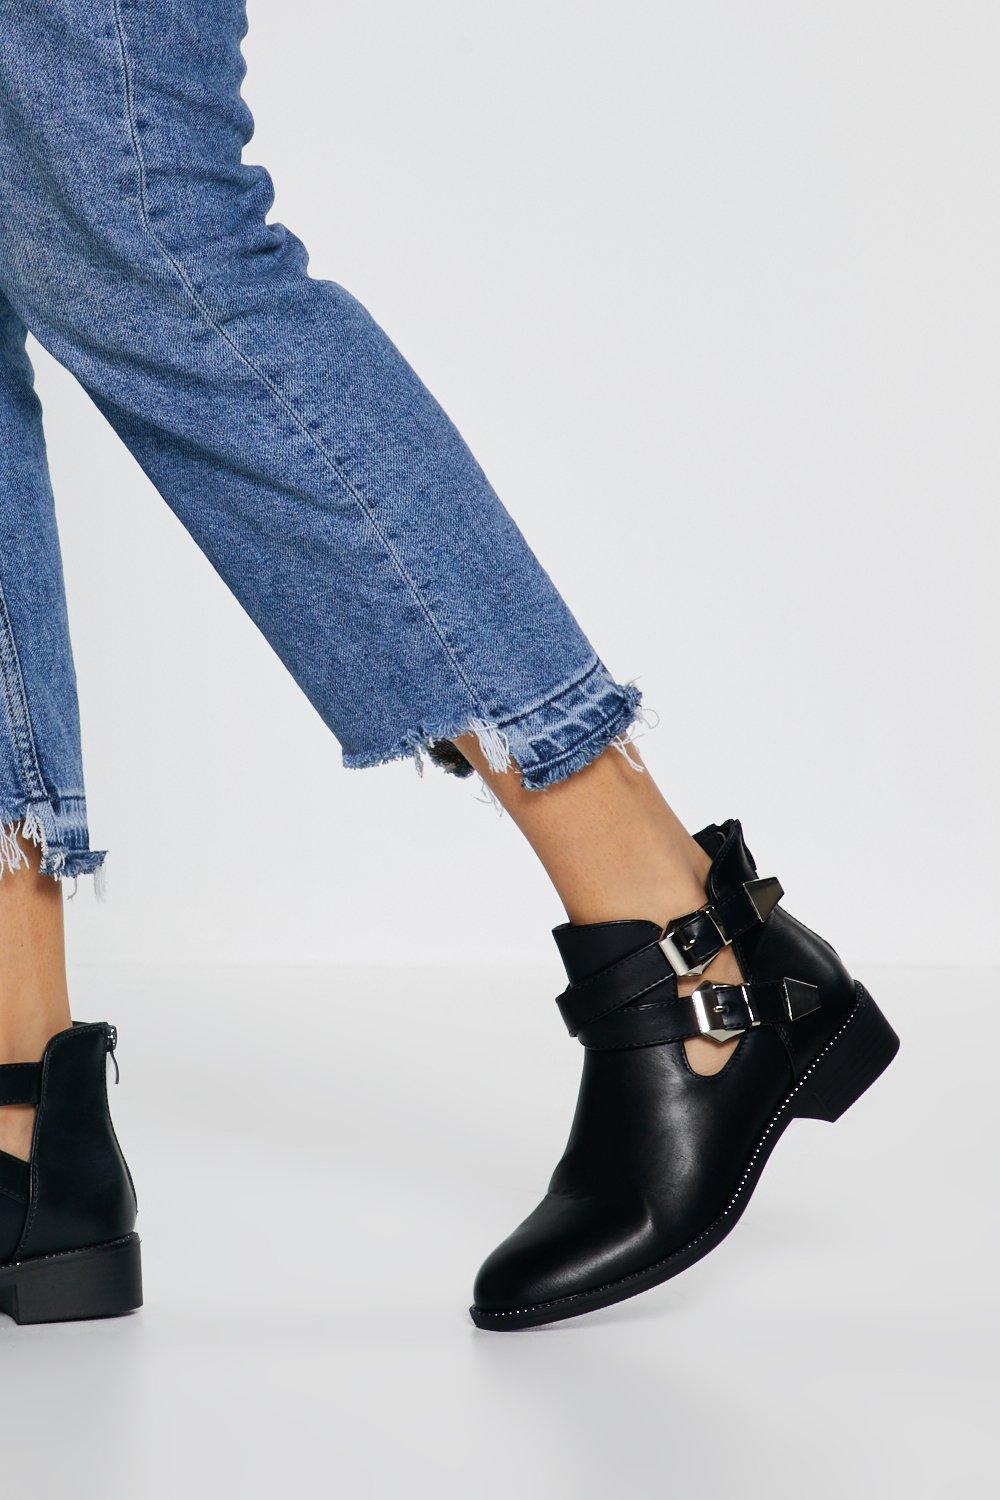 Cut Out Ankle Boots | Nasty Gal